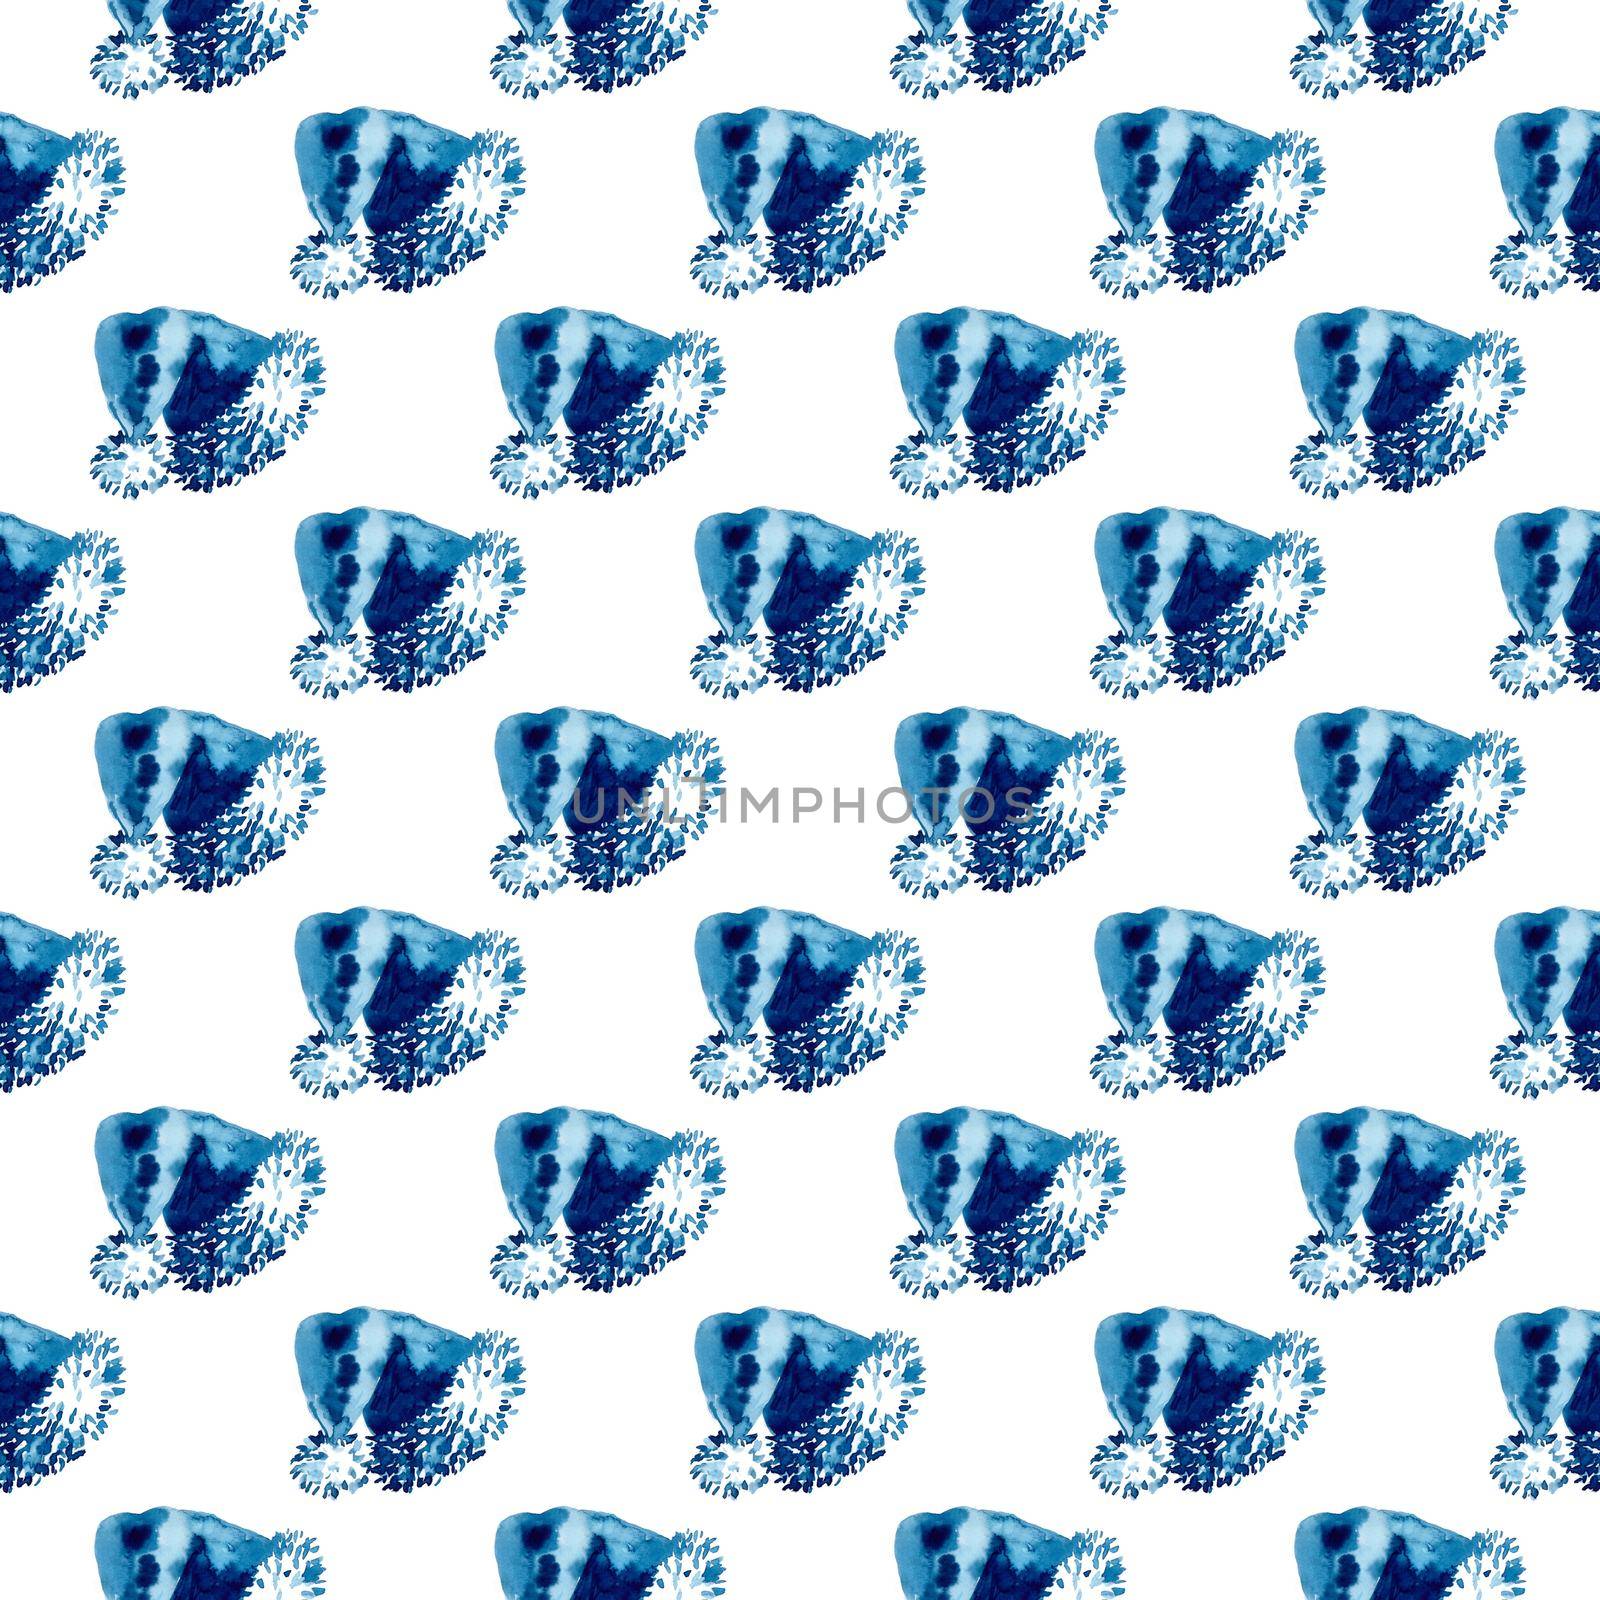 XMAS watercolor Santa Claus Hat Seamless Pattern in Blue Color. Hand PaintedCap Costume background or wallpaper for Ornament, Wrapping or Christmas Gift.